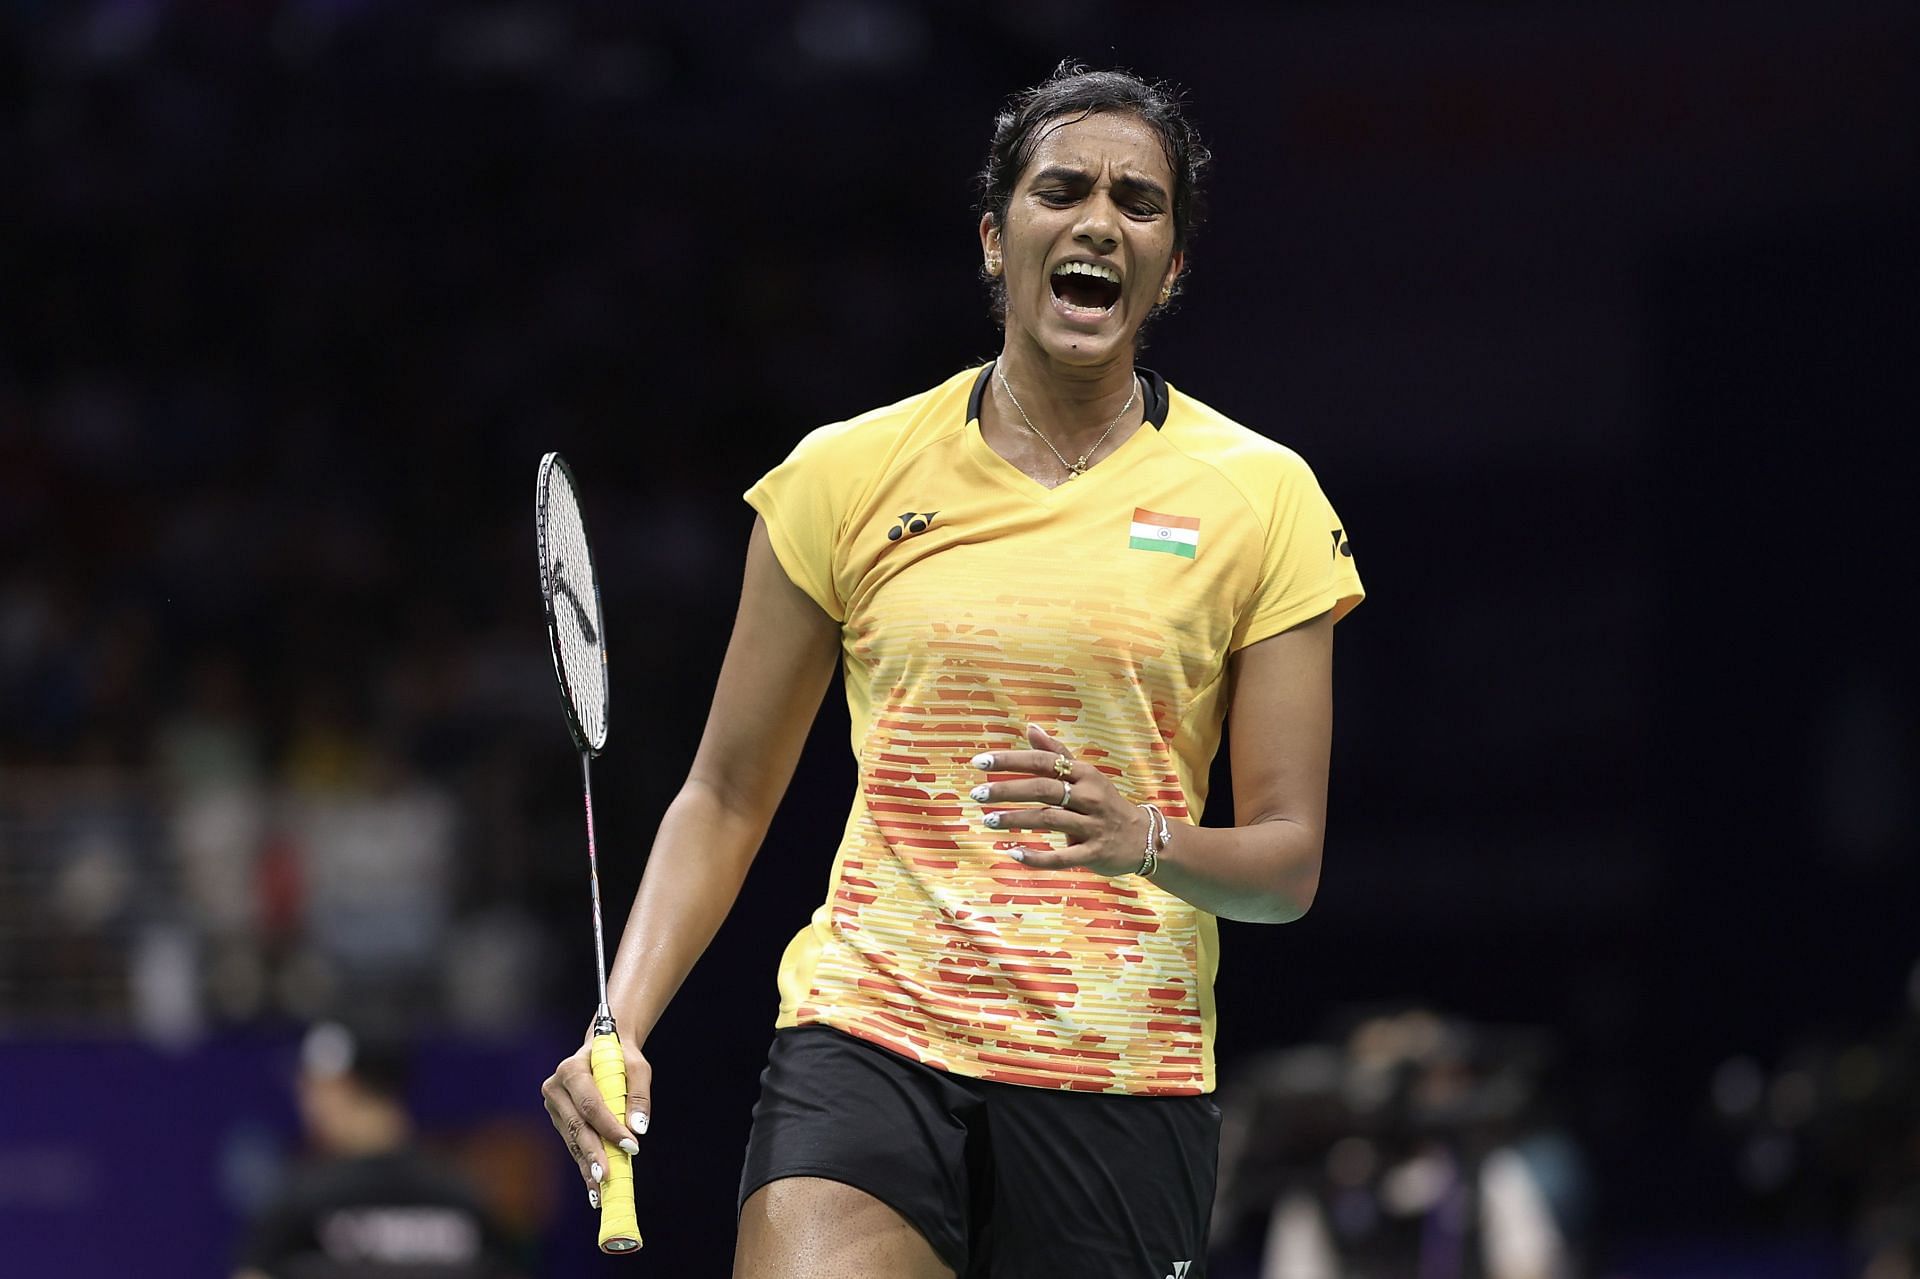 Indonesia Open 2023 PV Sindhu vs Tai Tzu Ying, head-to-head, prediction, where to watch and live streaming details